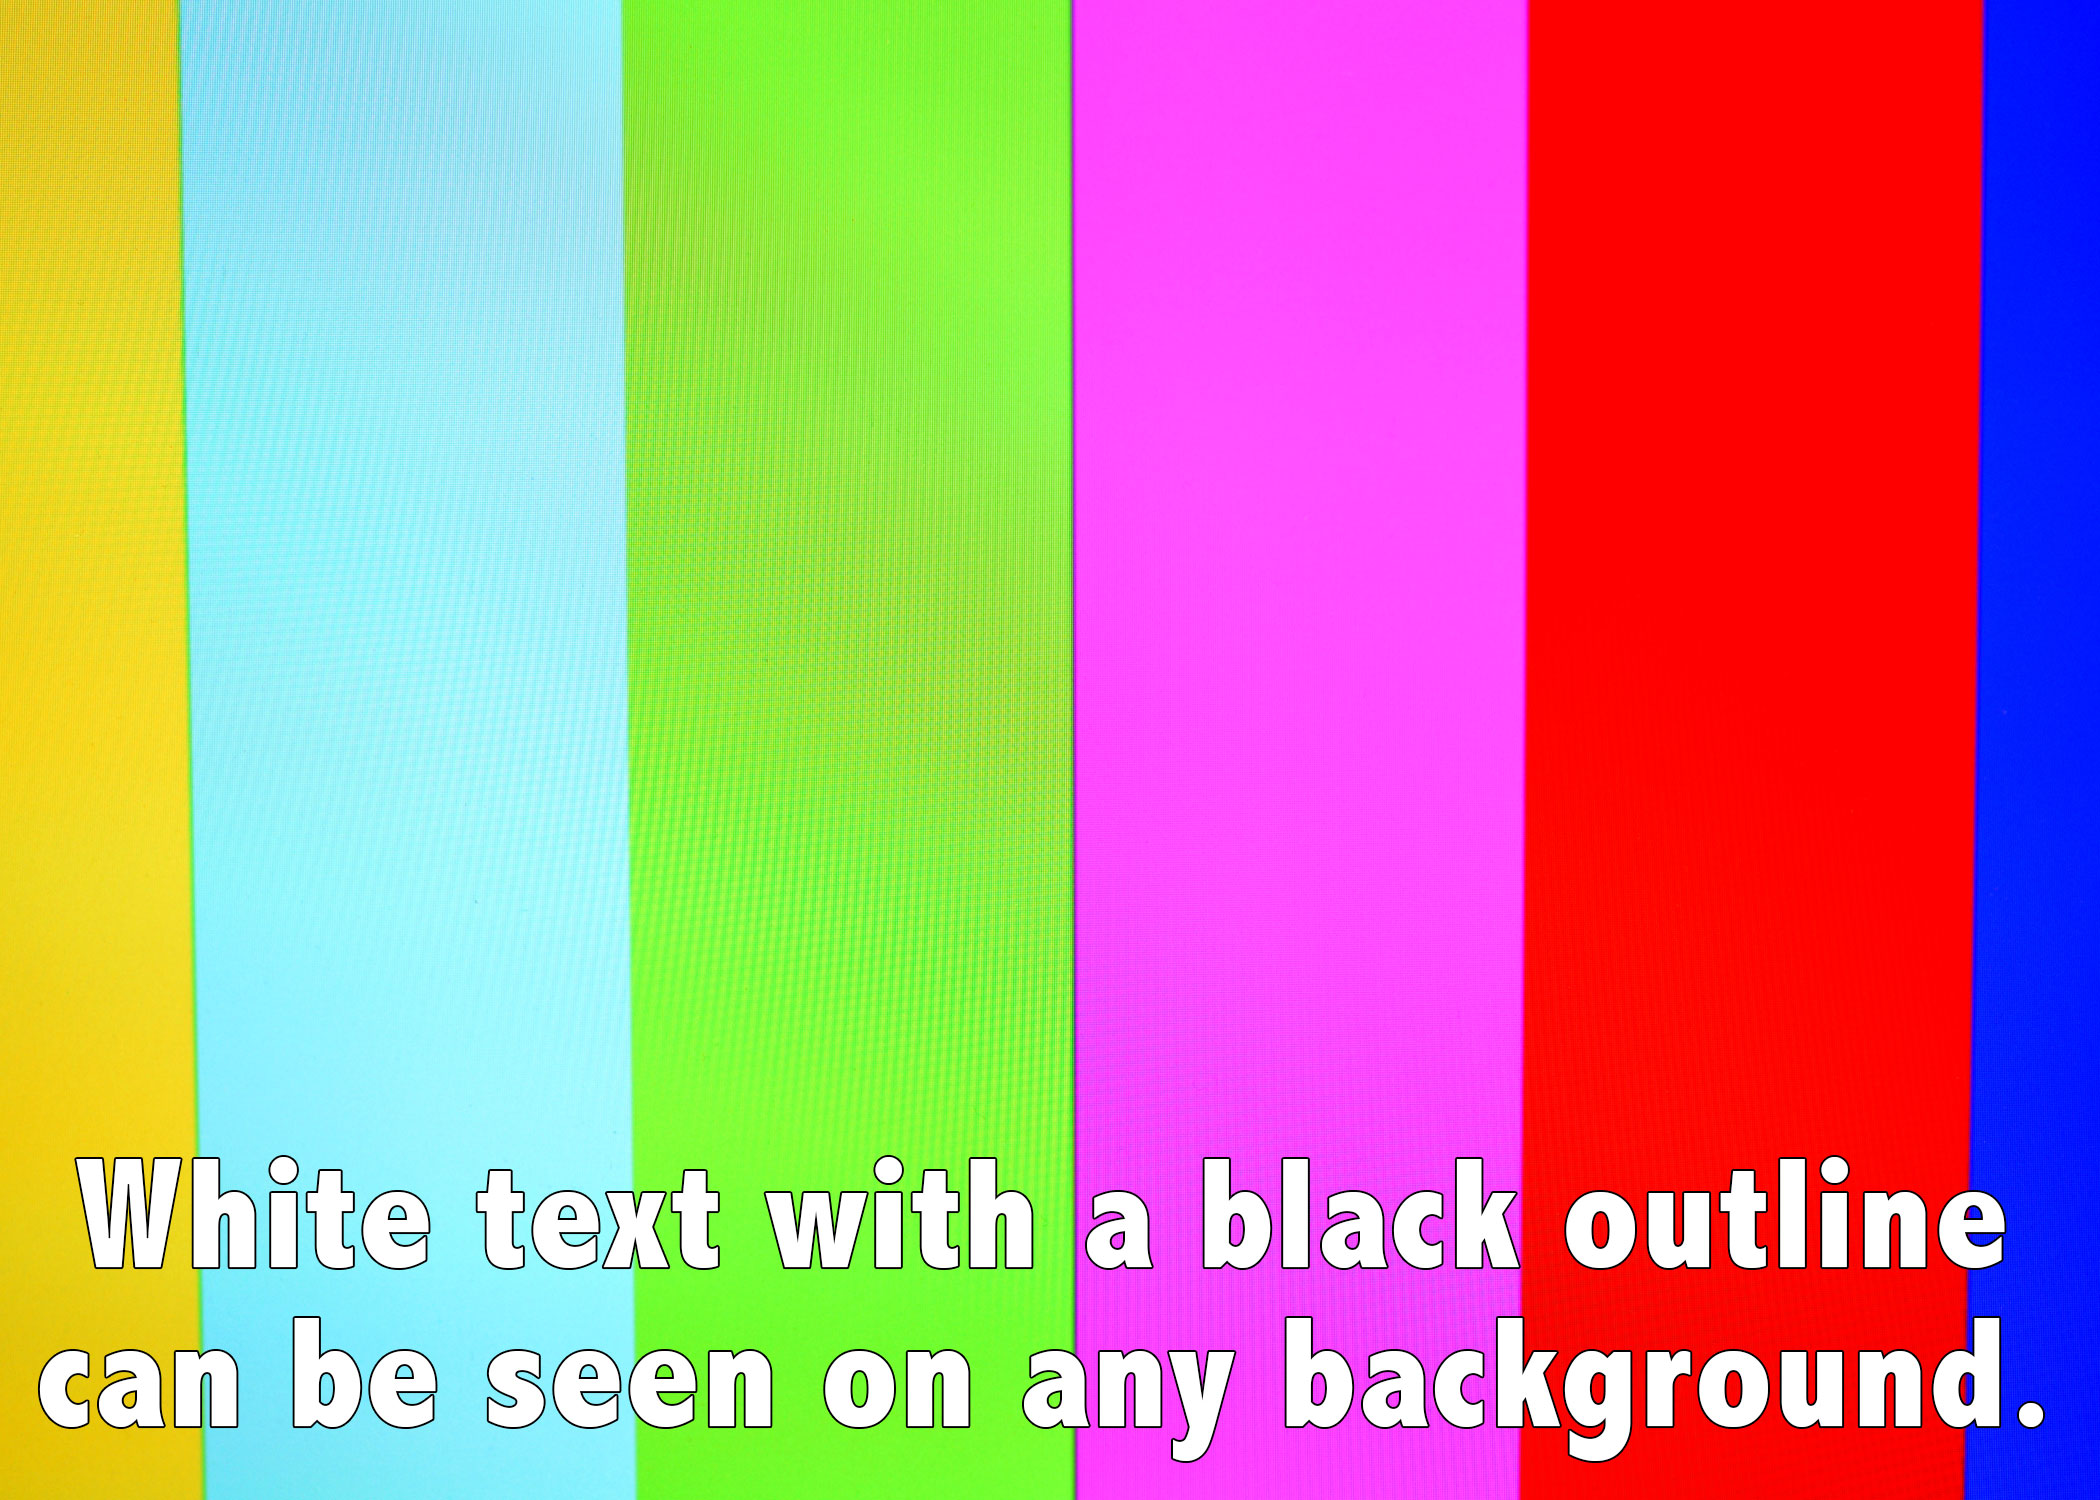 White text with a black outline can be seen on any background